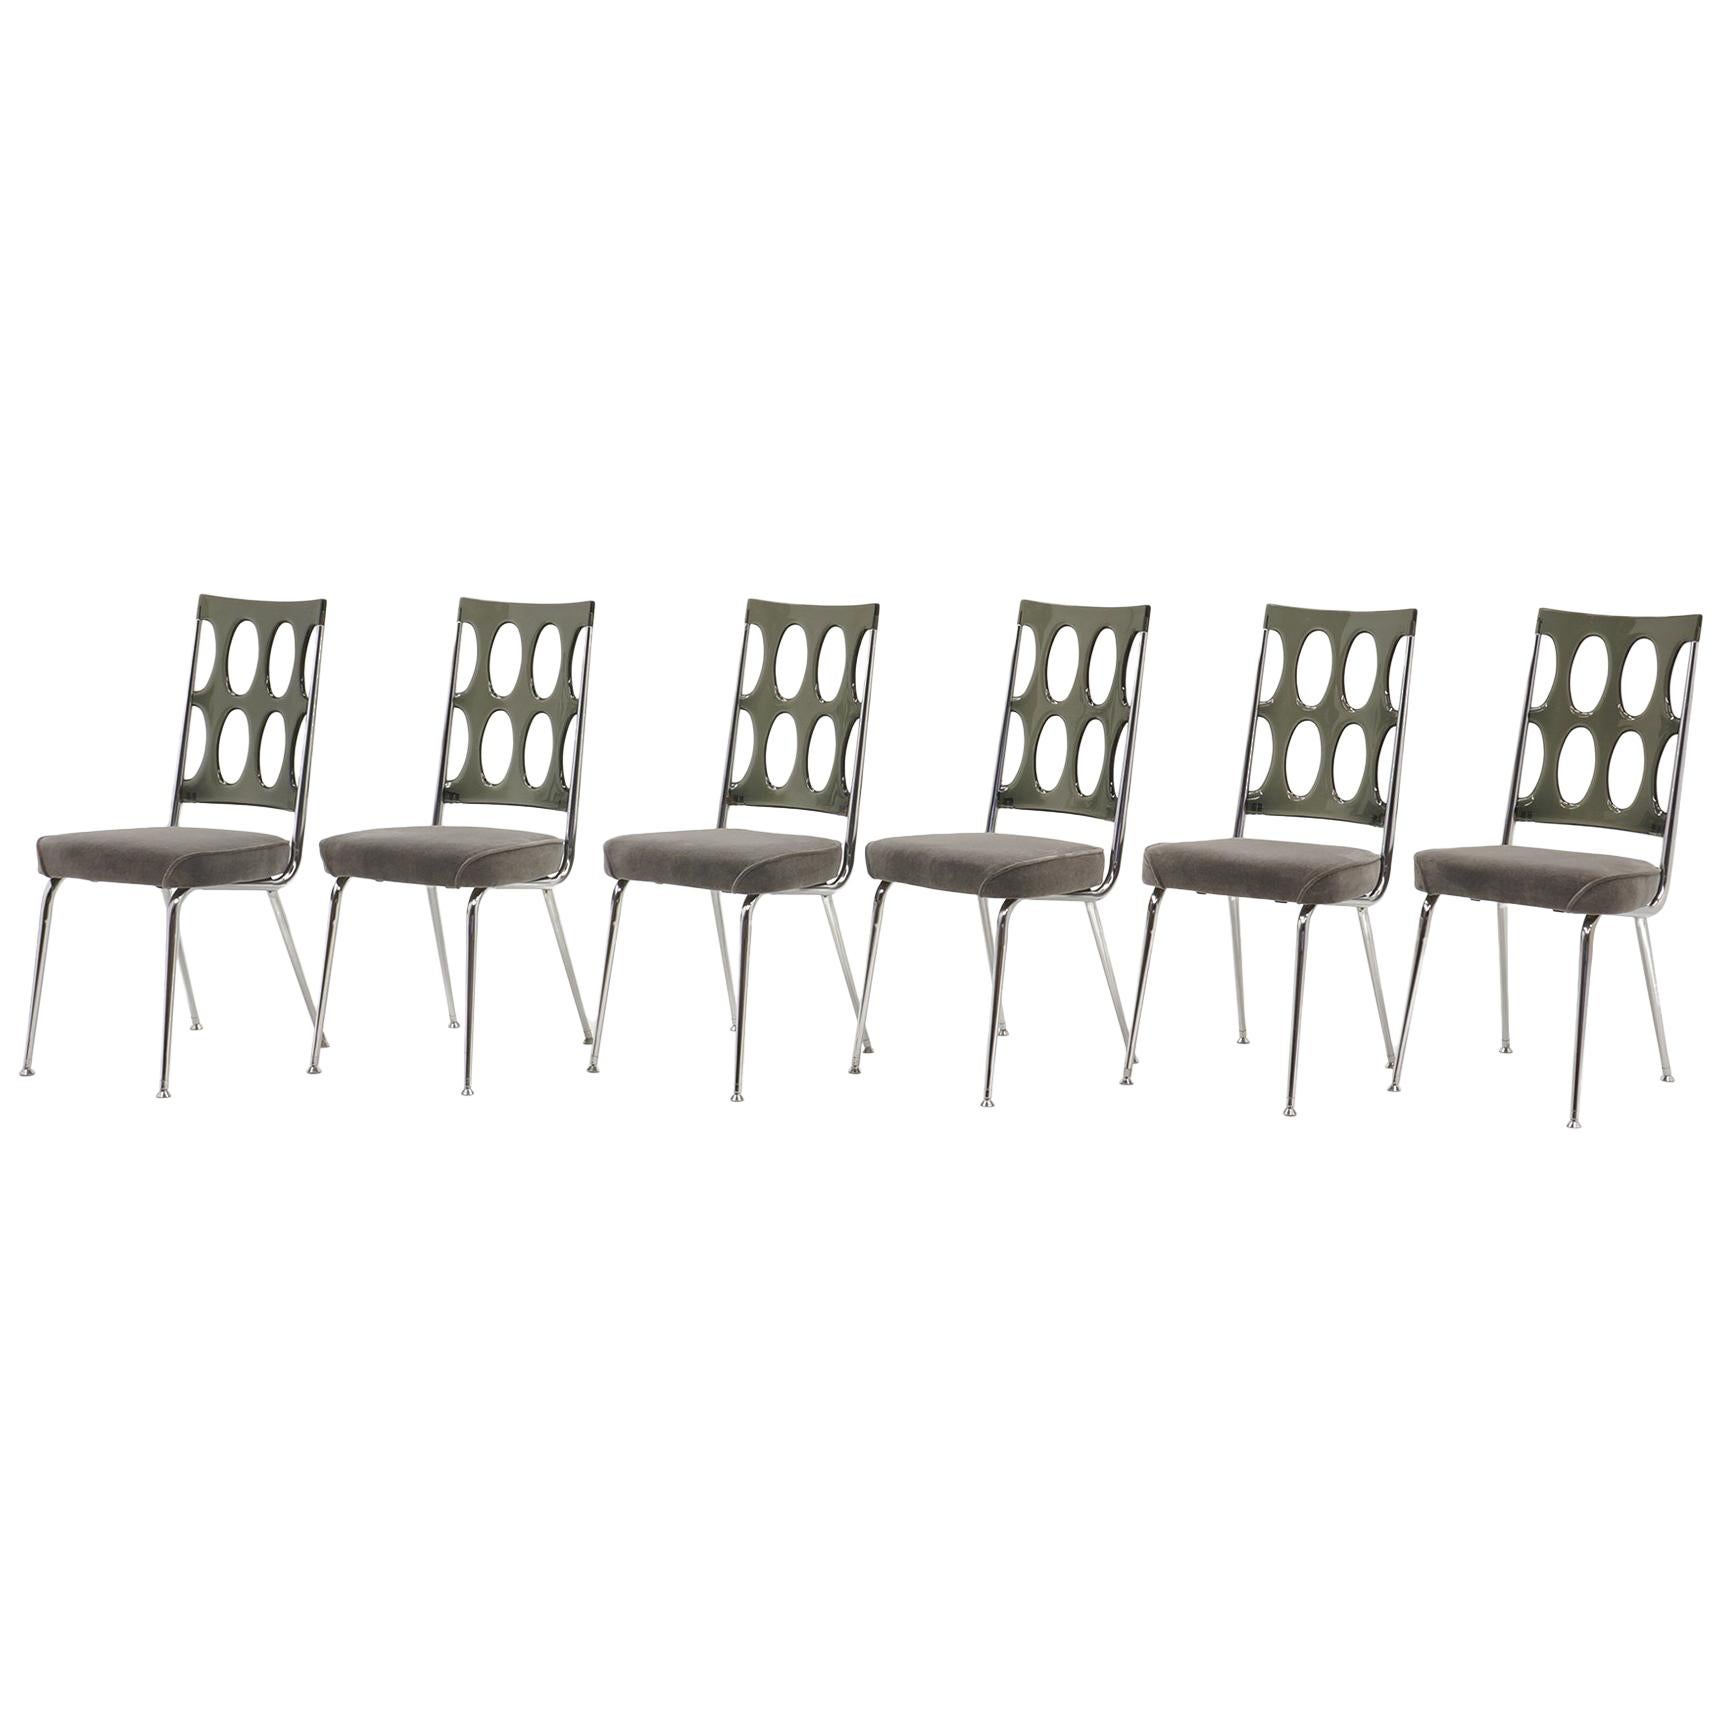 Set of Six Chrome Craft Dining Chairs, Gray Acrylic Backs and New Velvet Seats